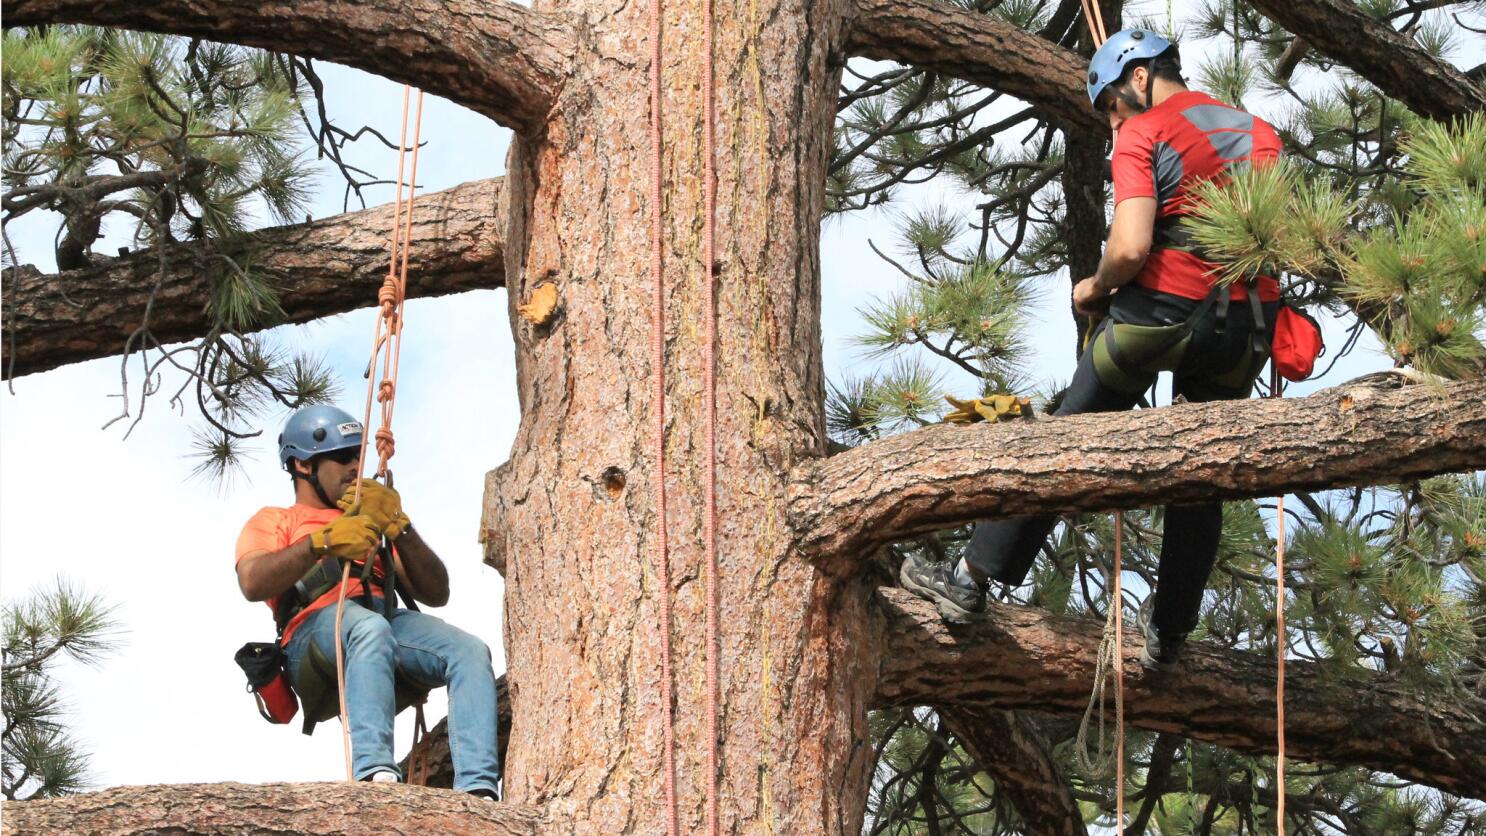 Bored with your workouts? Try tree rope climbing - Los Angeles Times